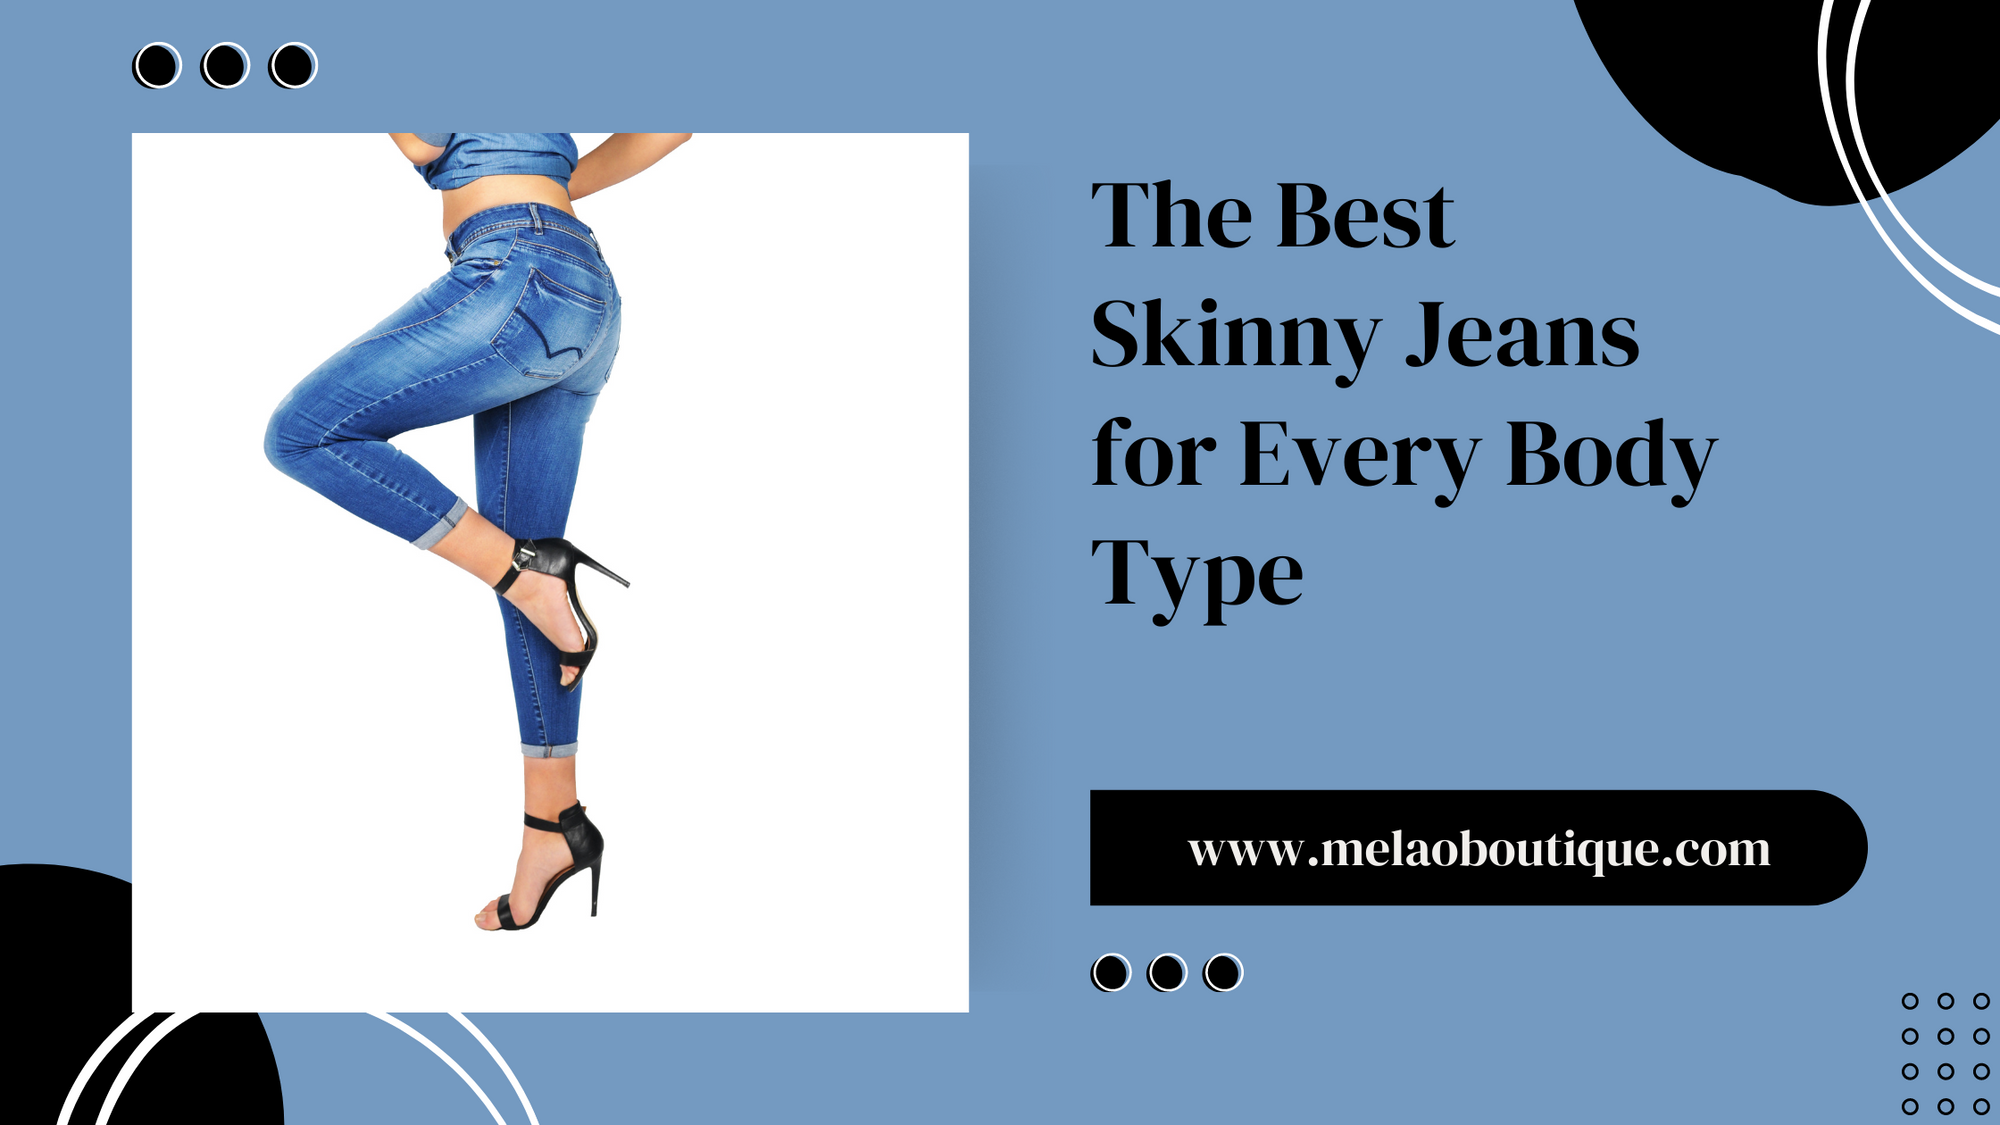 The Best Skinny Jeans for Every Body Type